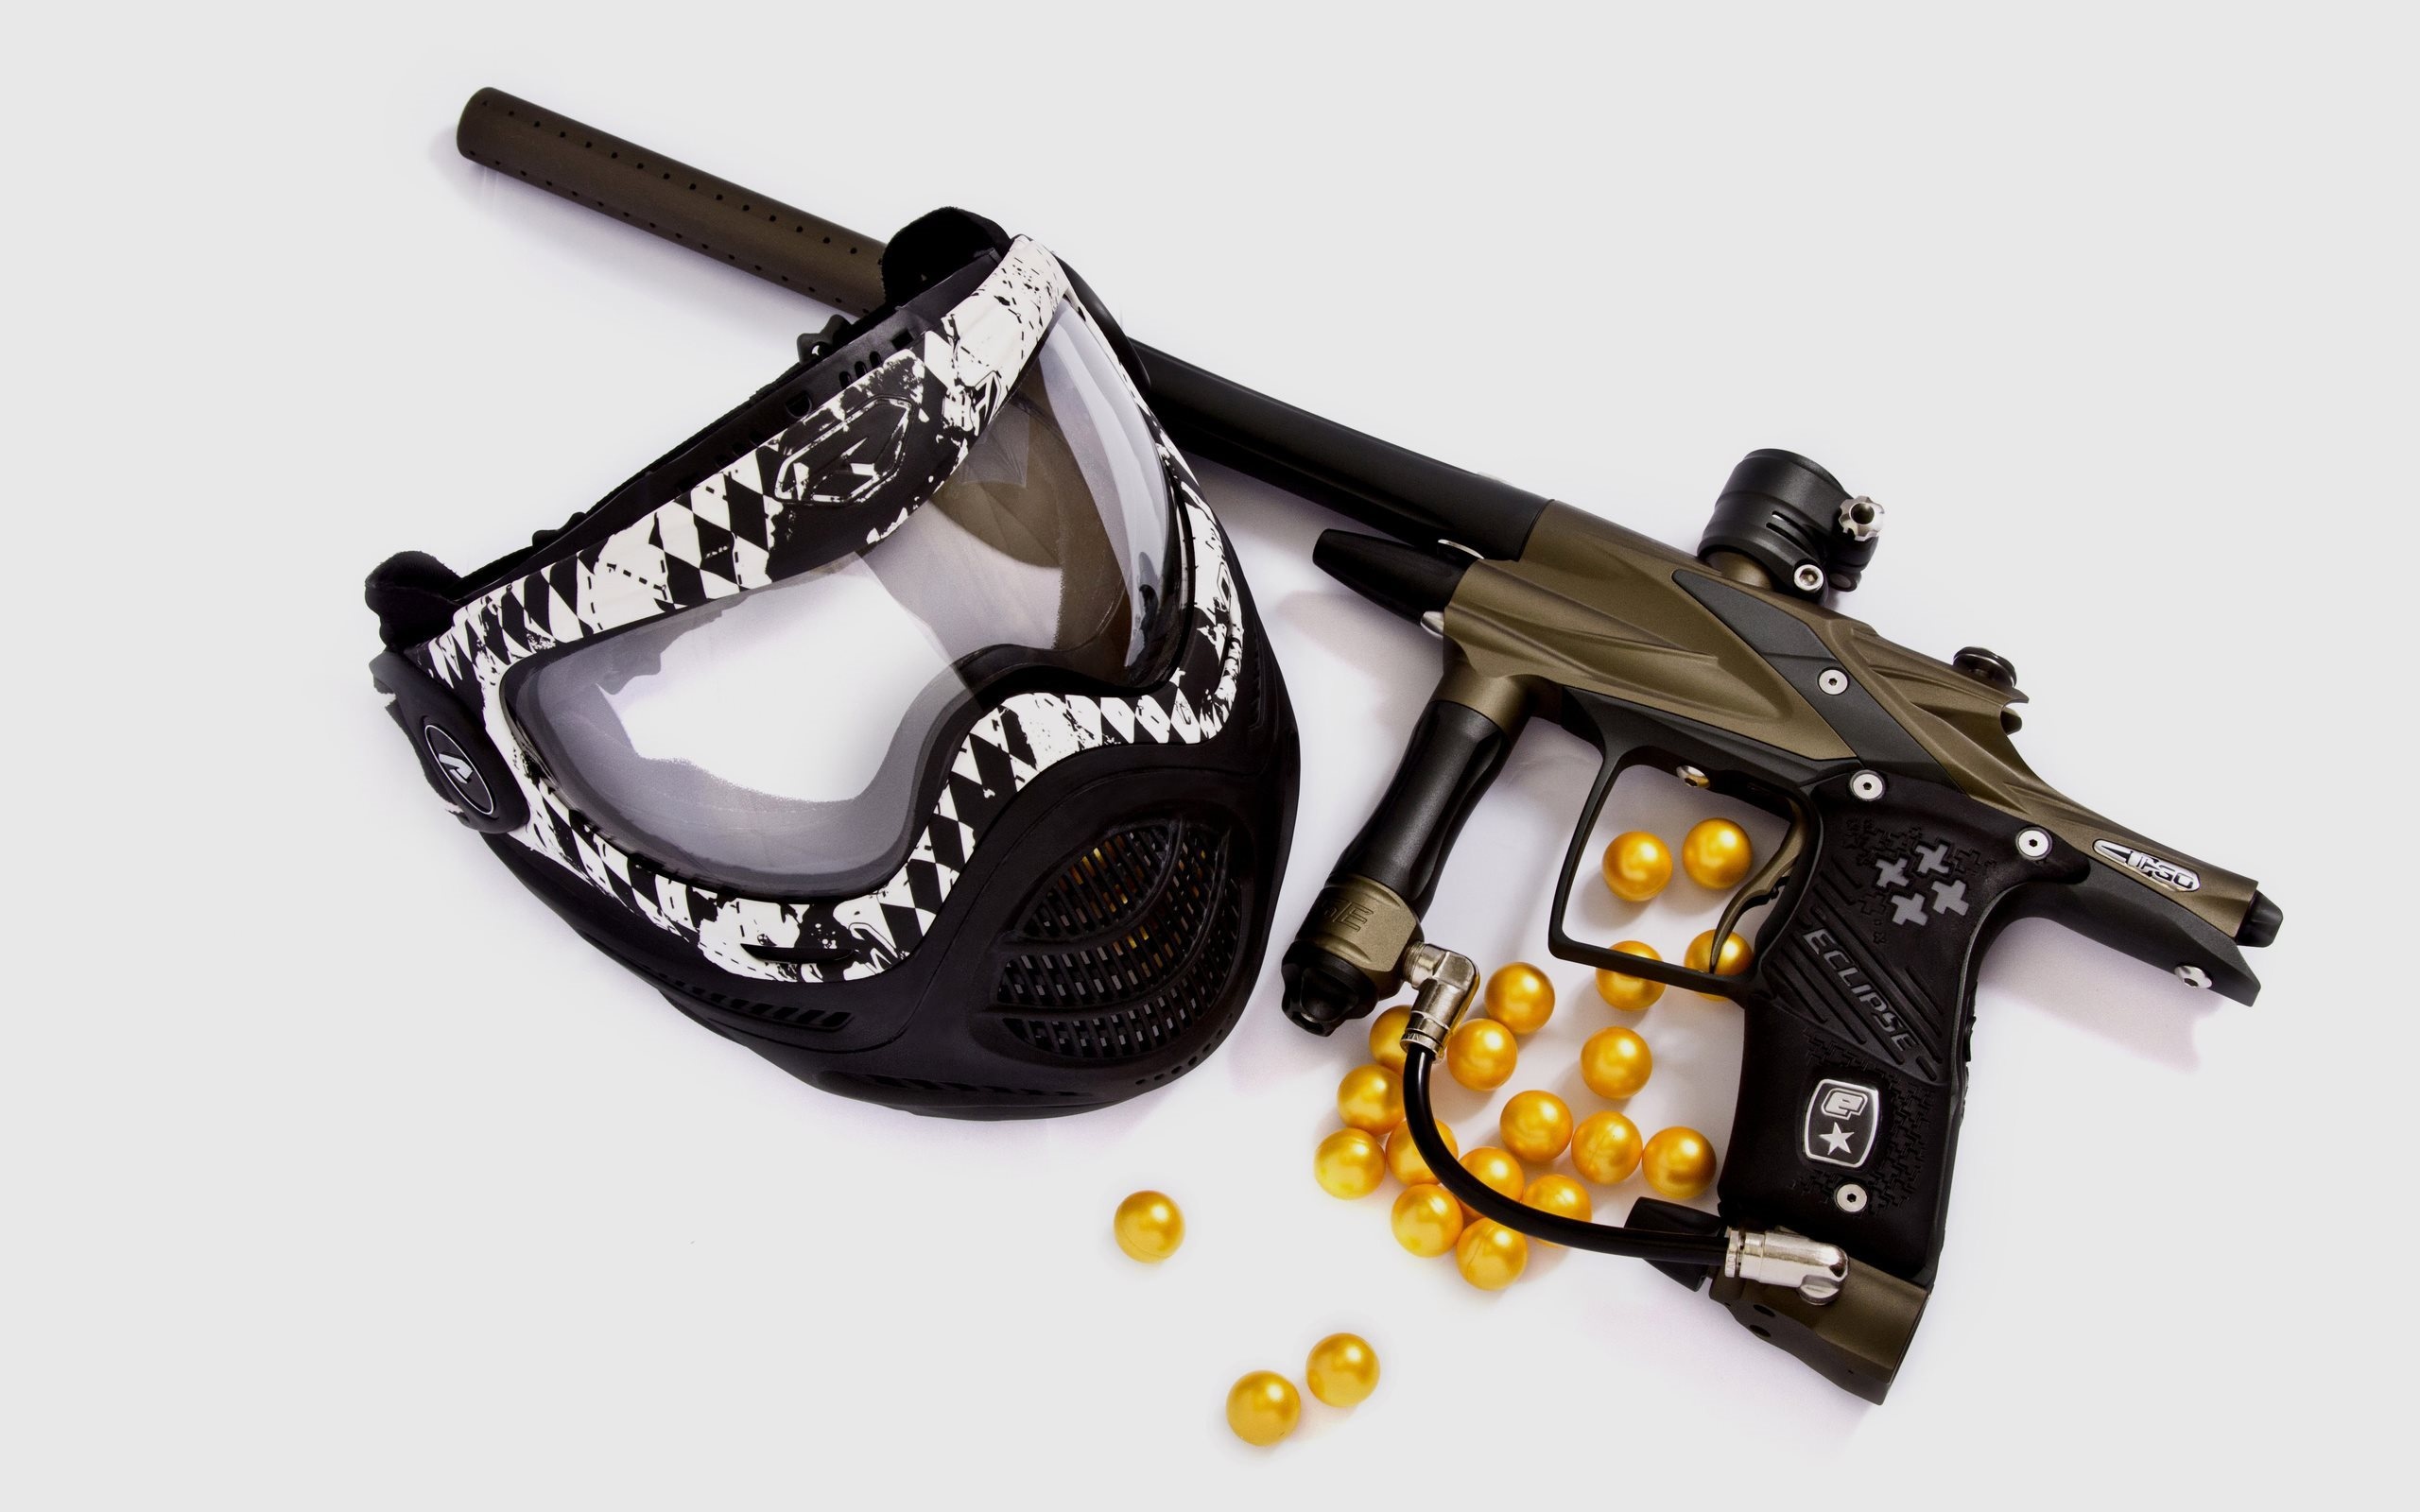 Paintball: A paint marker, shield mask and paints - equipment for an outdoor recreational game. 2560x1600 HD Wallpaper.